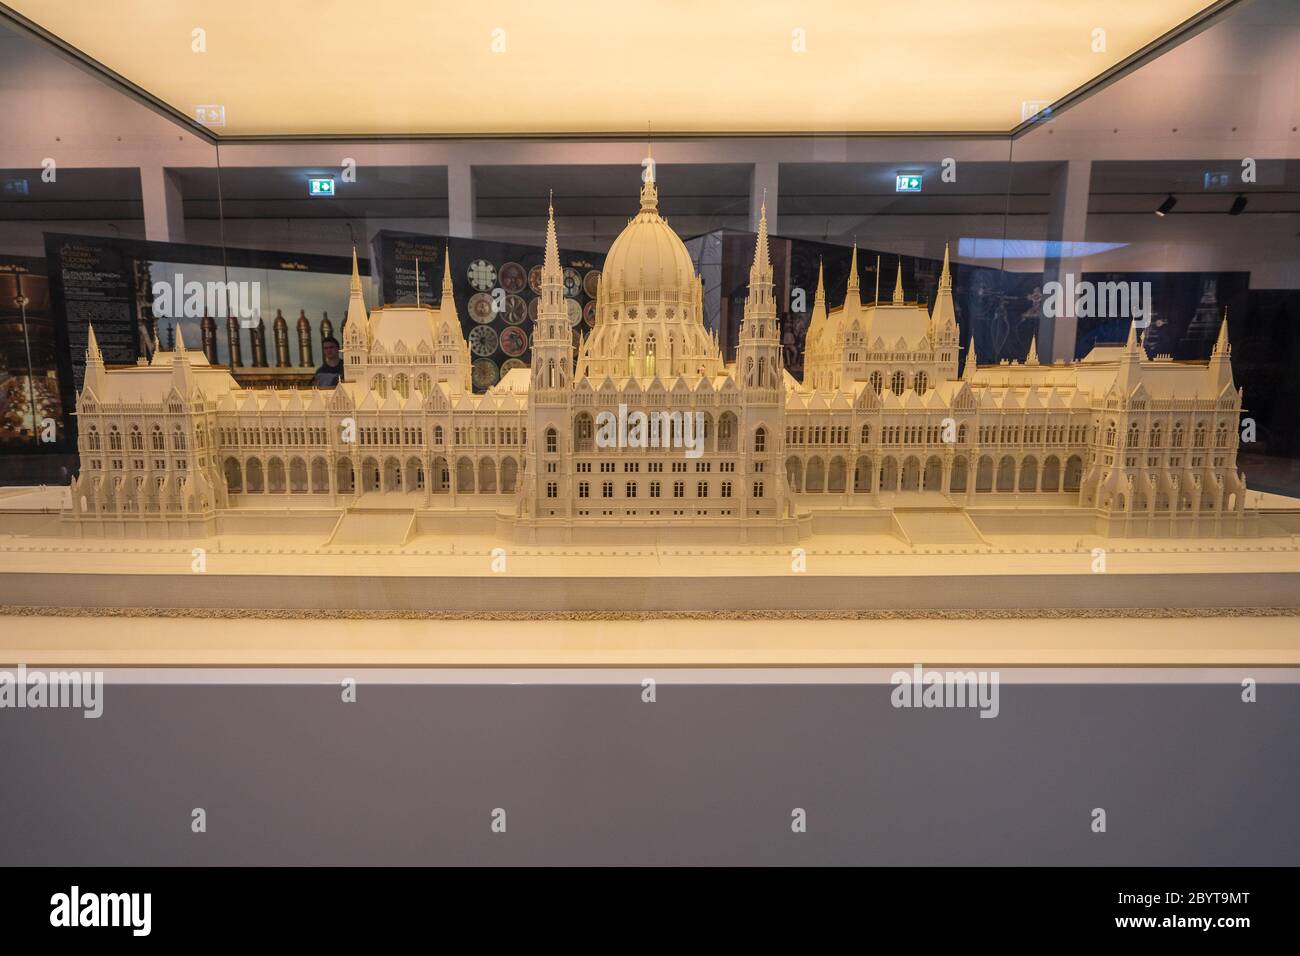 Budapest, Hungary - Feb 10, 2020: Miniature model of Hungarian Parliament in exhibition Stock Photo